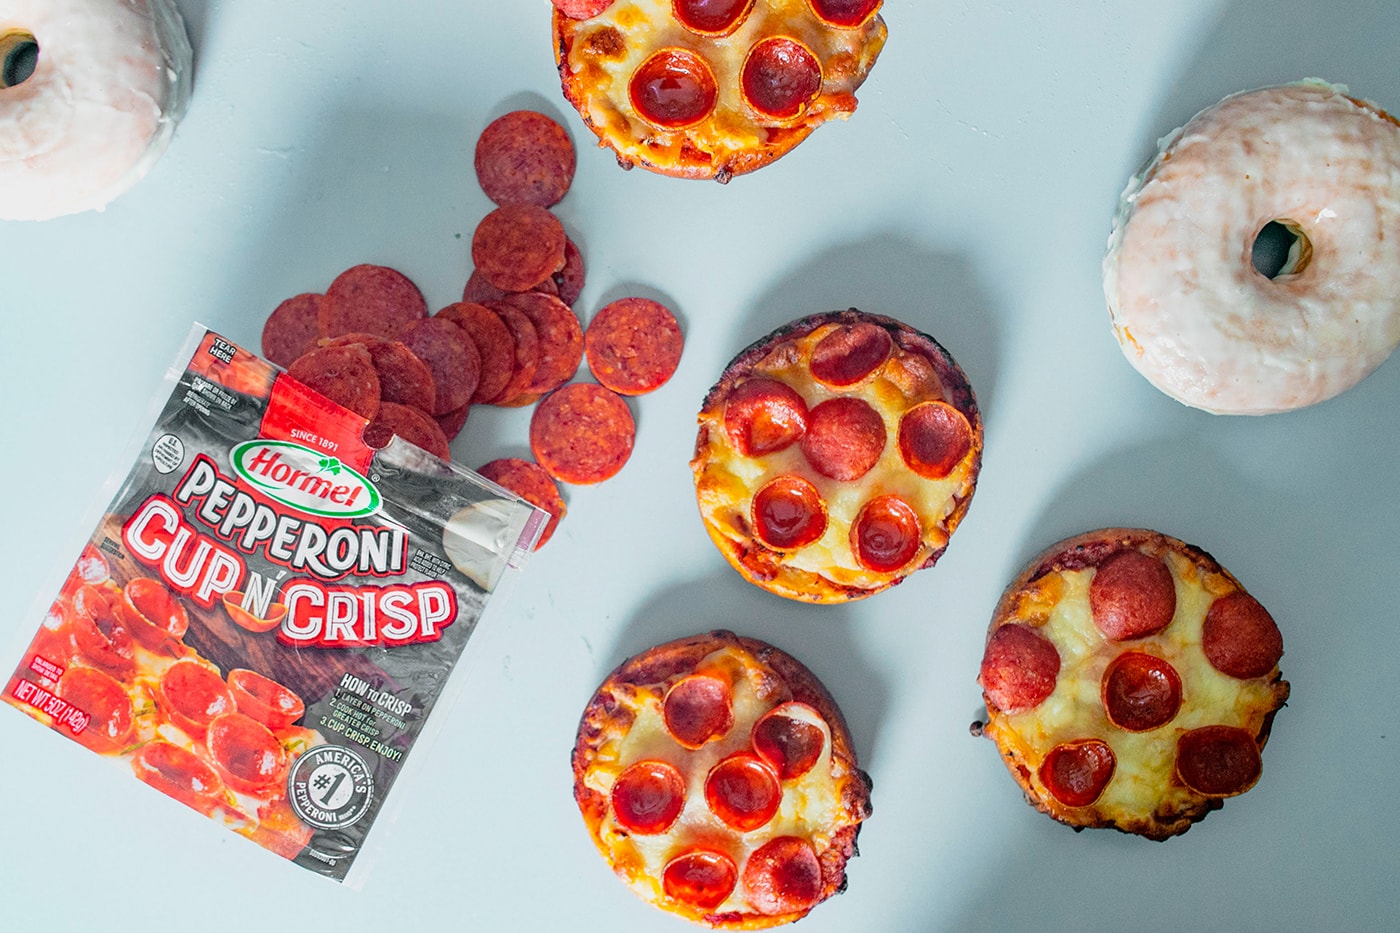 The Doughnut Project Hormel Pepperoni Cup N’ Crisp Cheese the Day donut food snacks new york donuts 